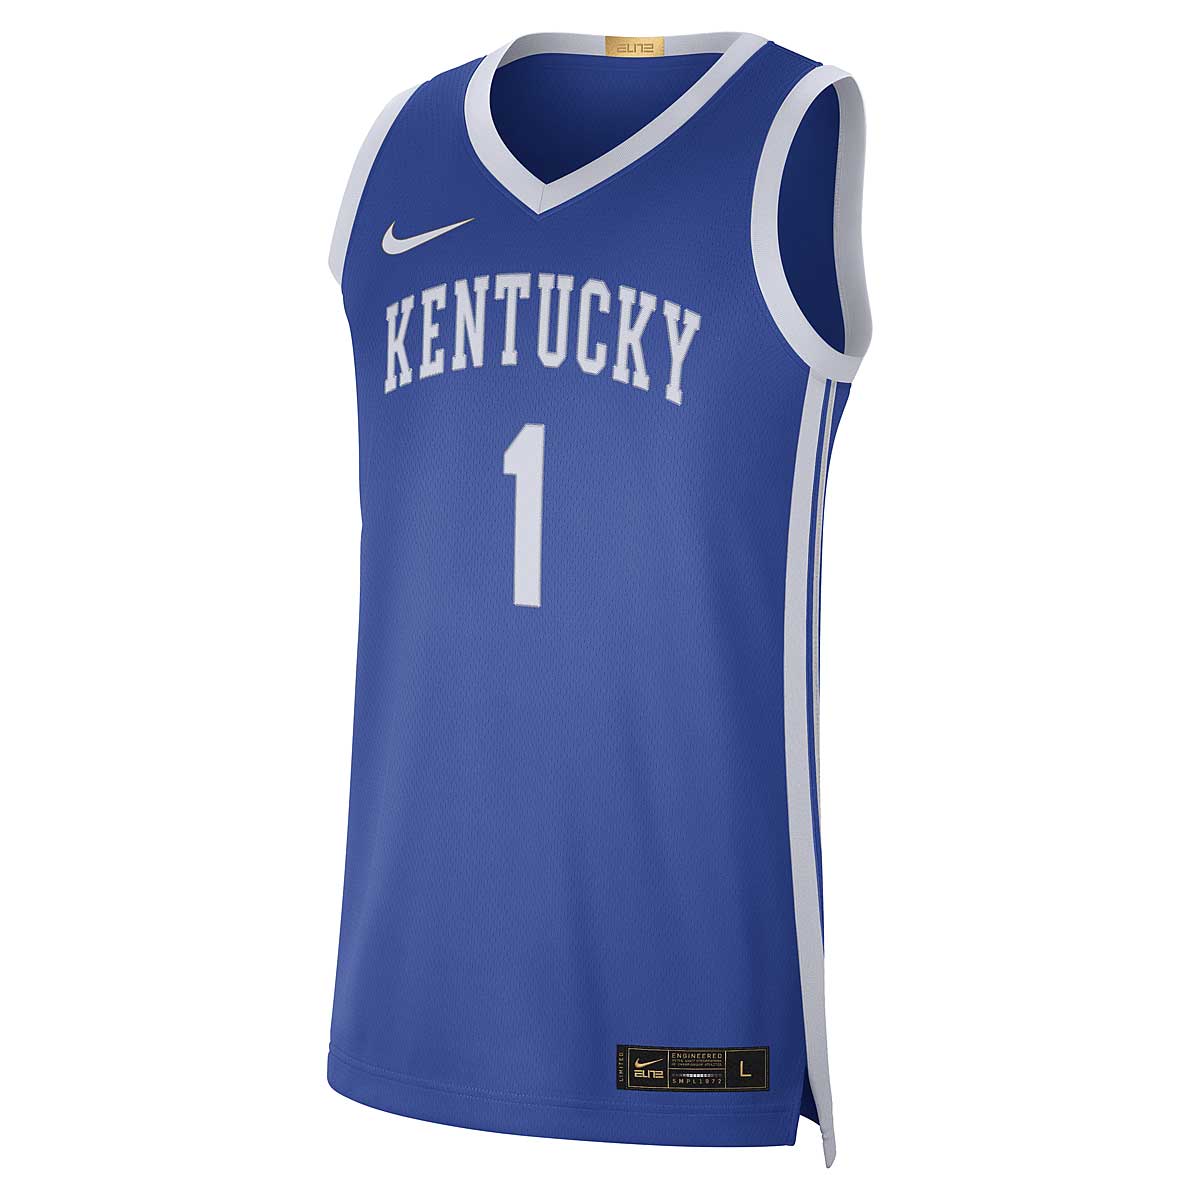 Nike Ncaa Kentucky Wildcats Dri-fit Limited Edition Jersey Devin Booker, Game Royal M